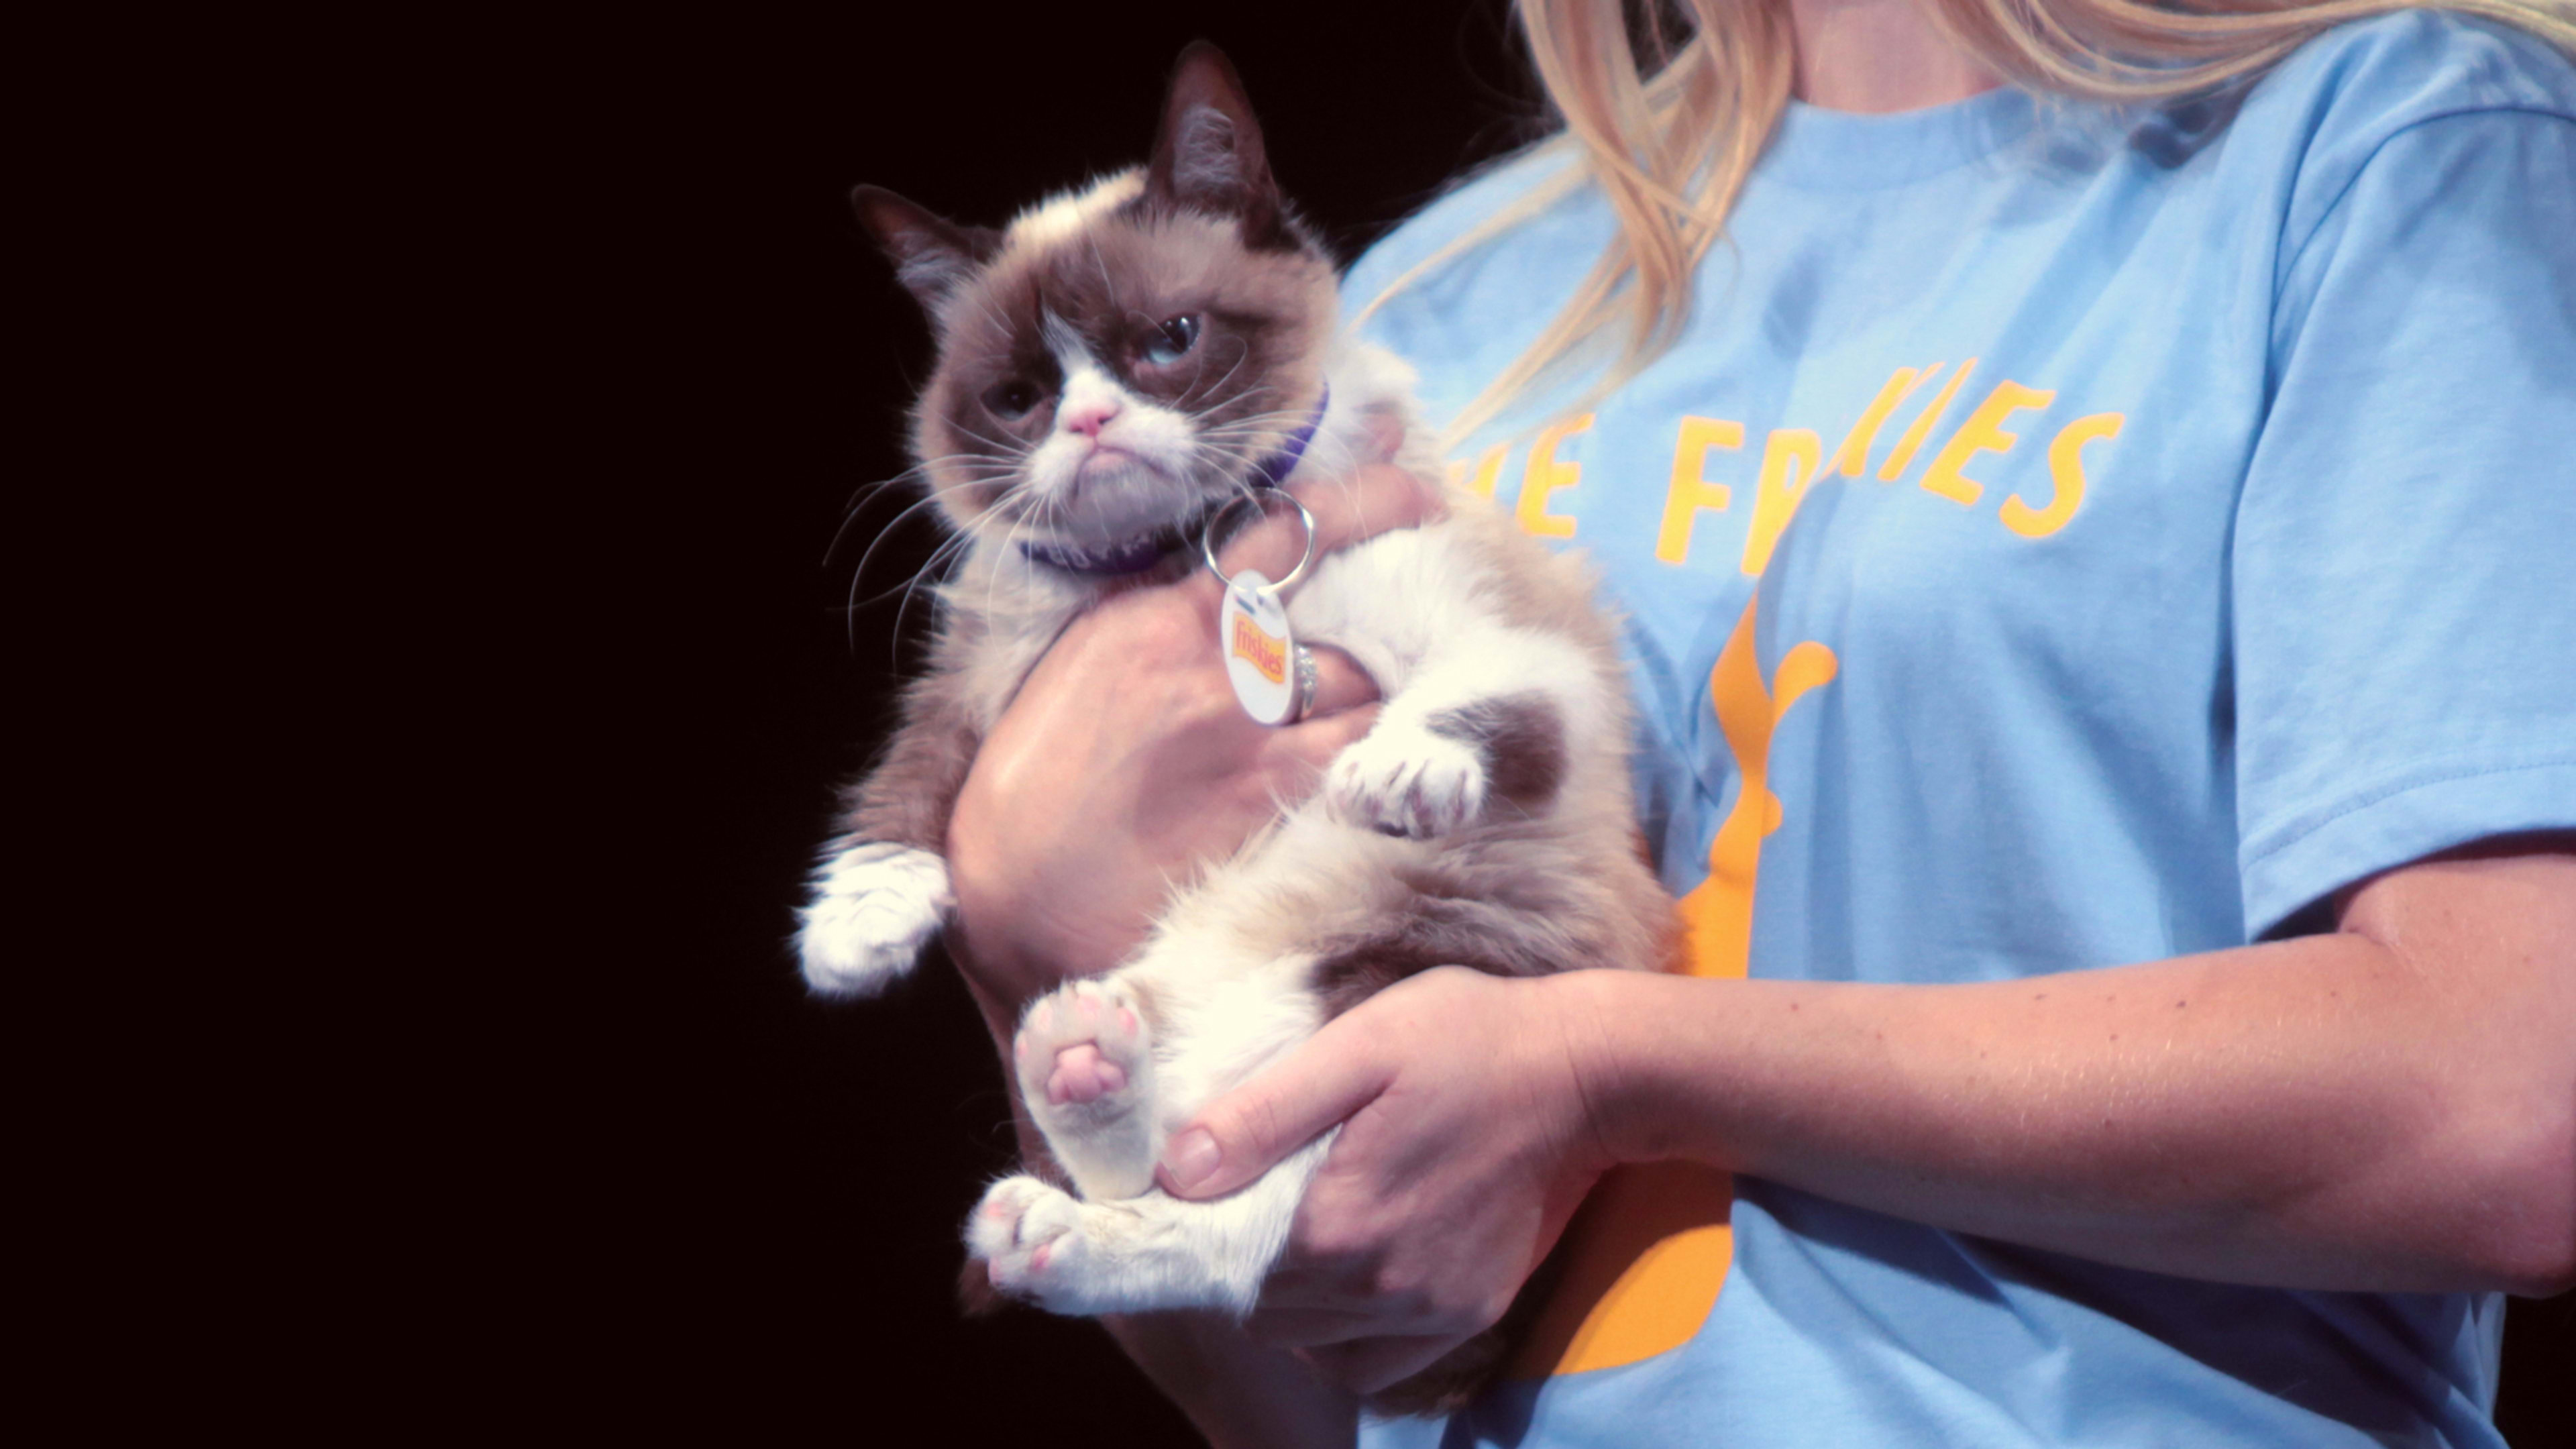 Now this is something to be grumpy about: Meme superstar Grumpy Cat has died